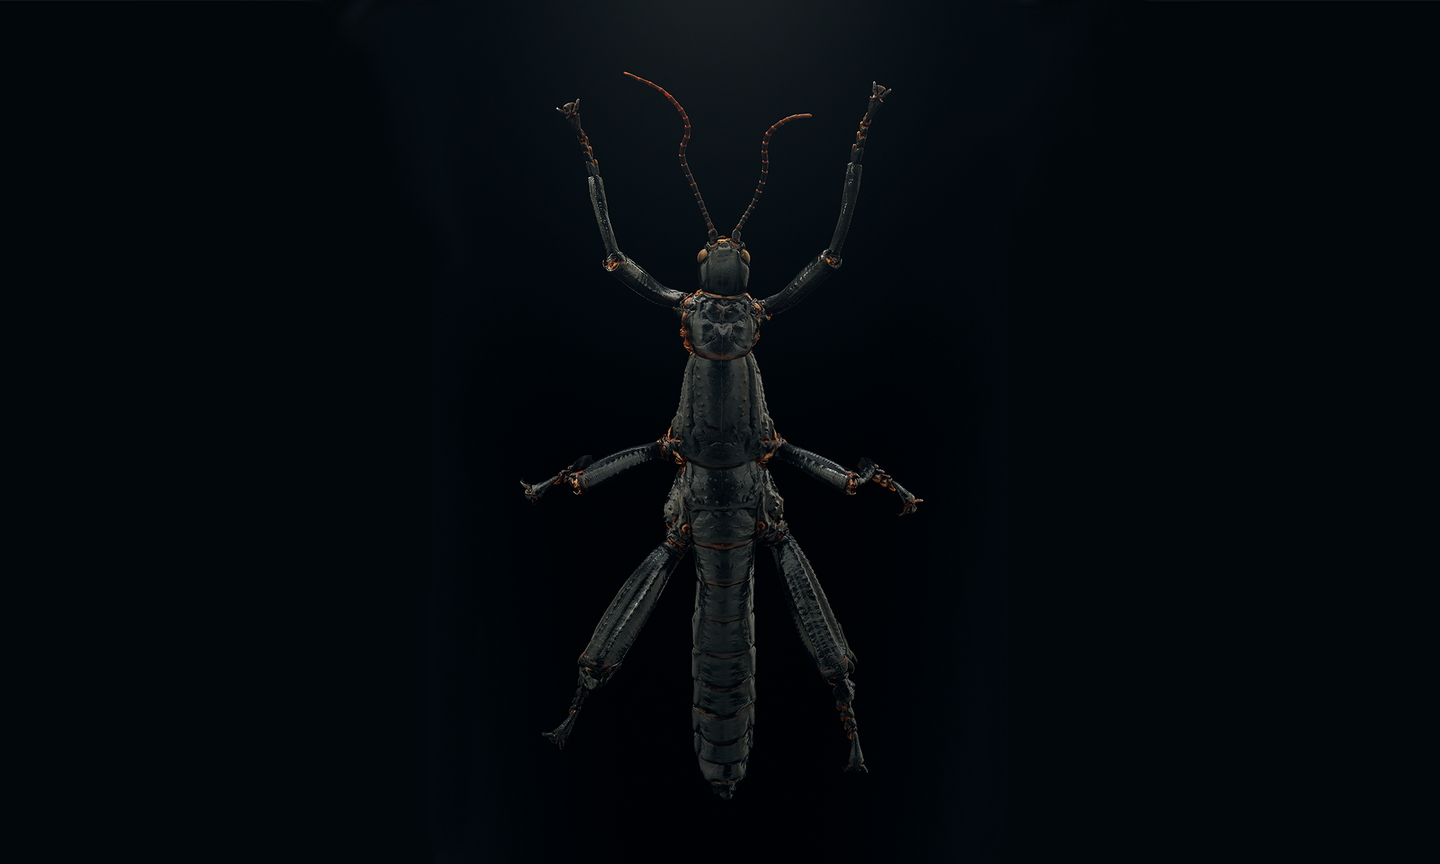 a large black stick bug isolated on a black background